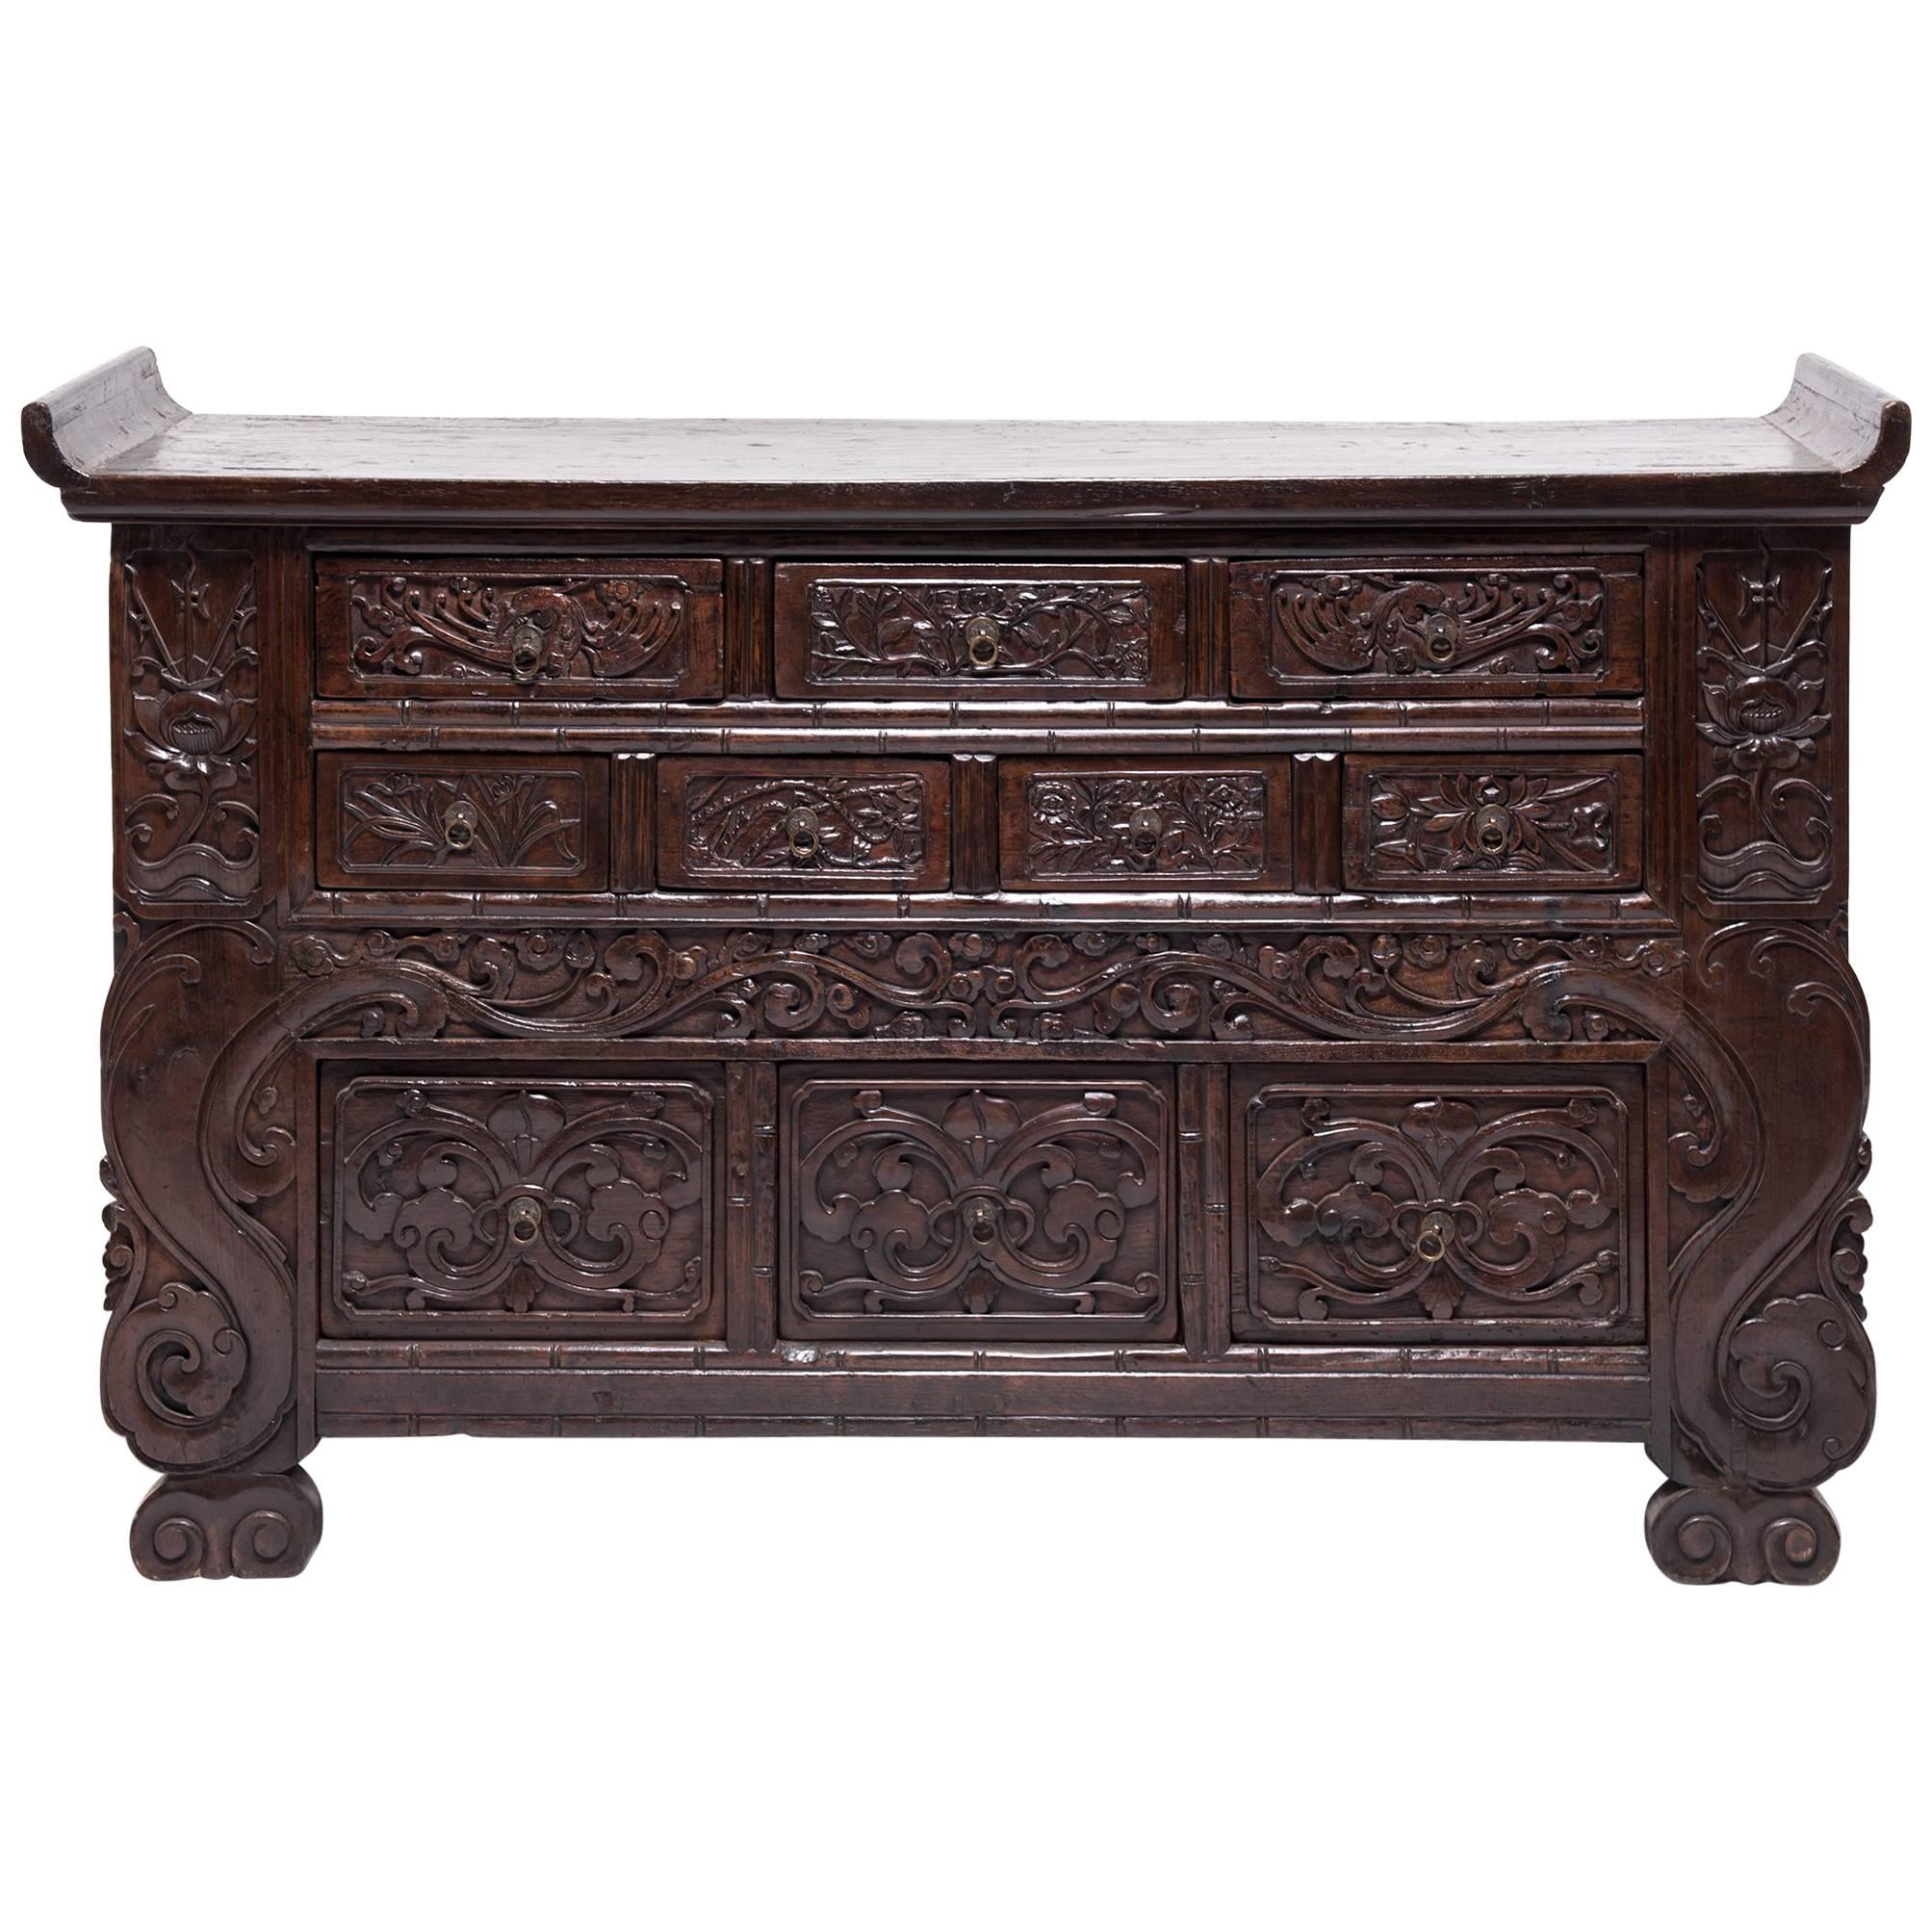 Chinese Carved Ten-Drawer Chest, c. 1850